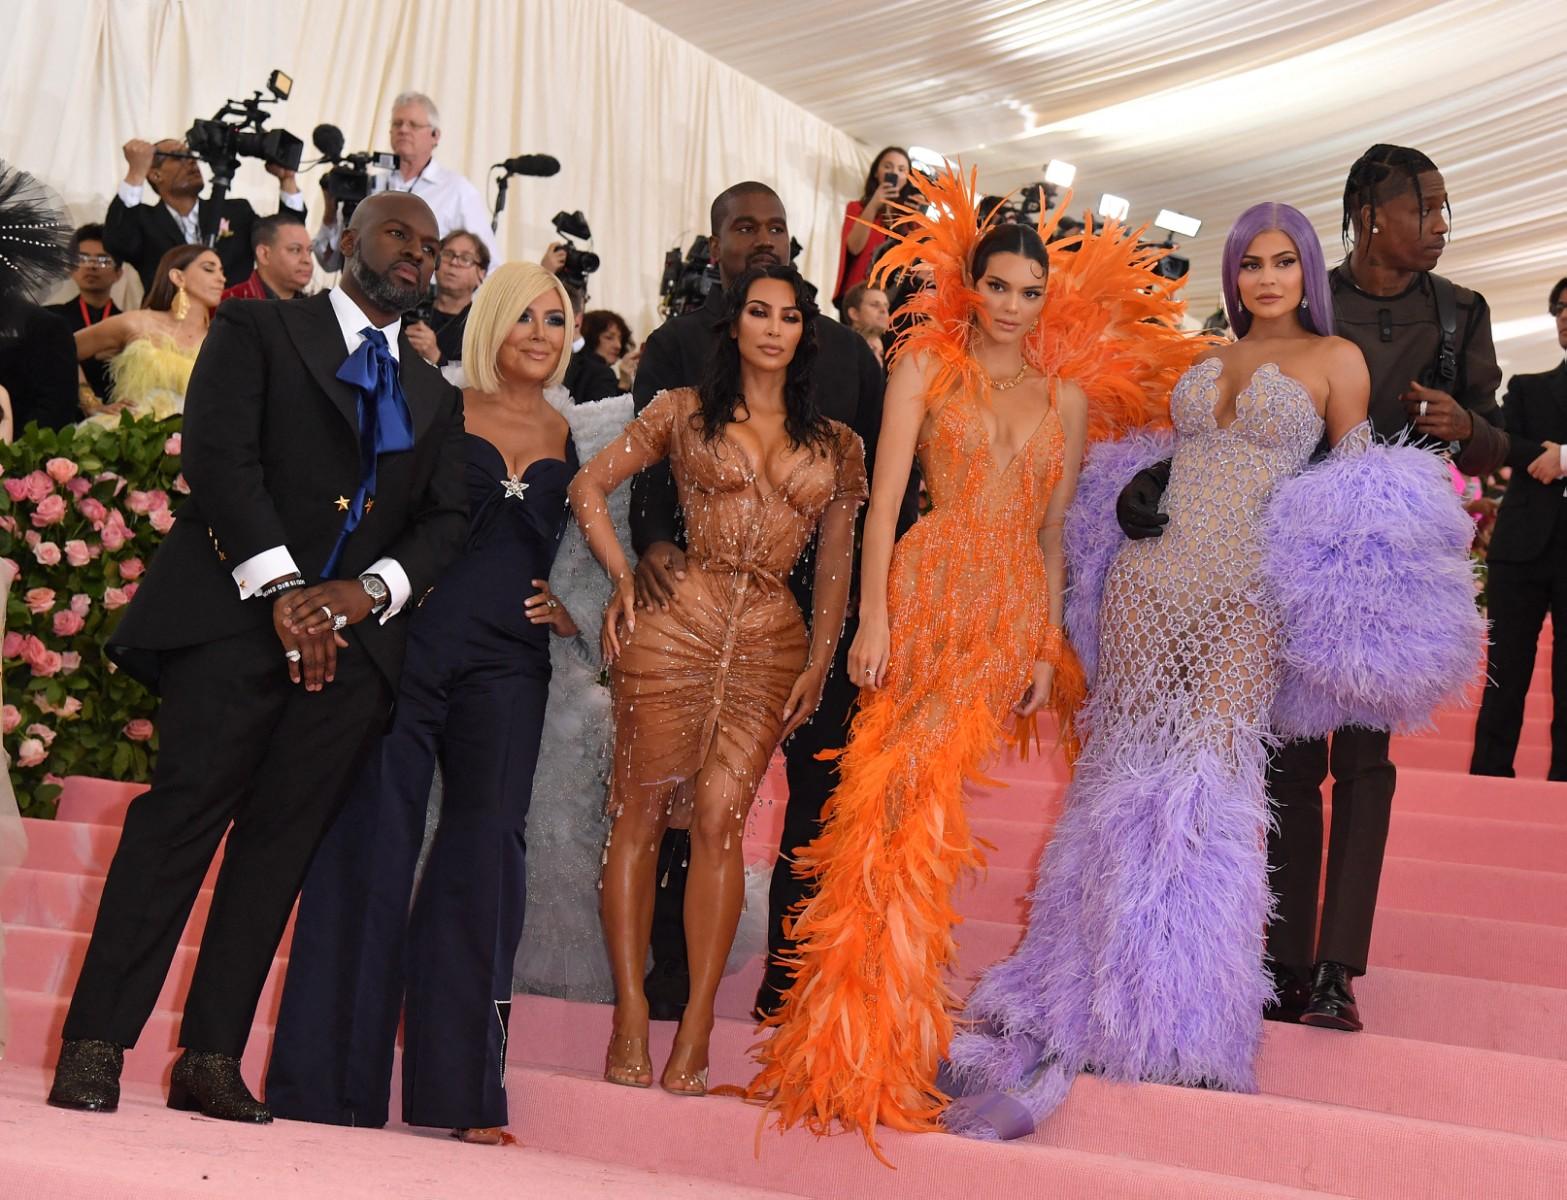 The Kardashian-Jenner family rocked the 2019 MET gala with their stunning looks. Check them out!